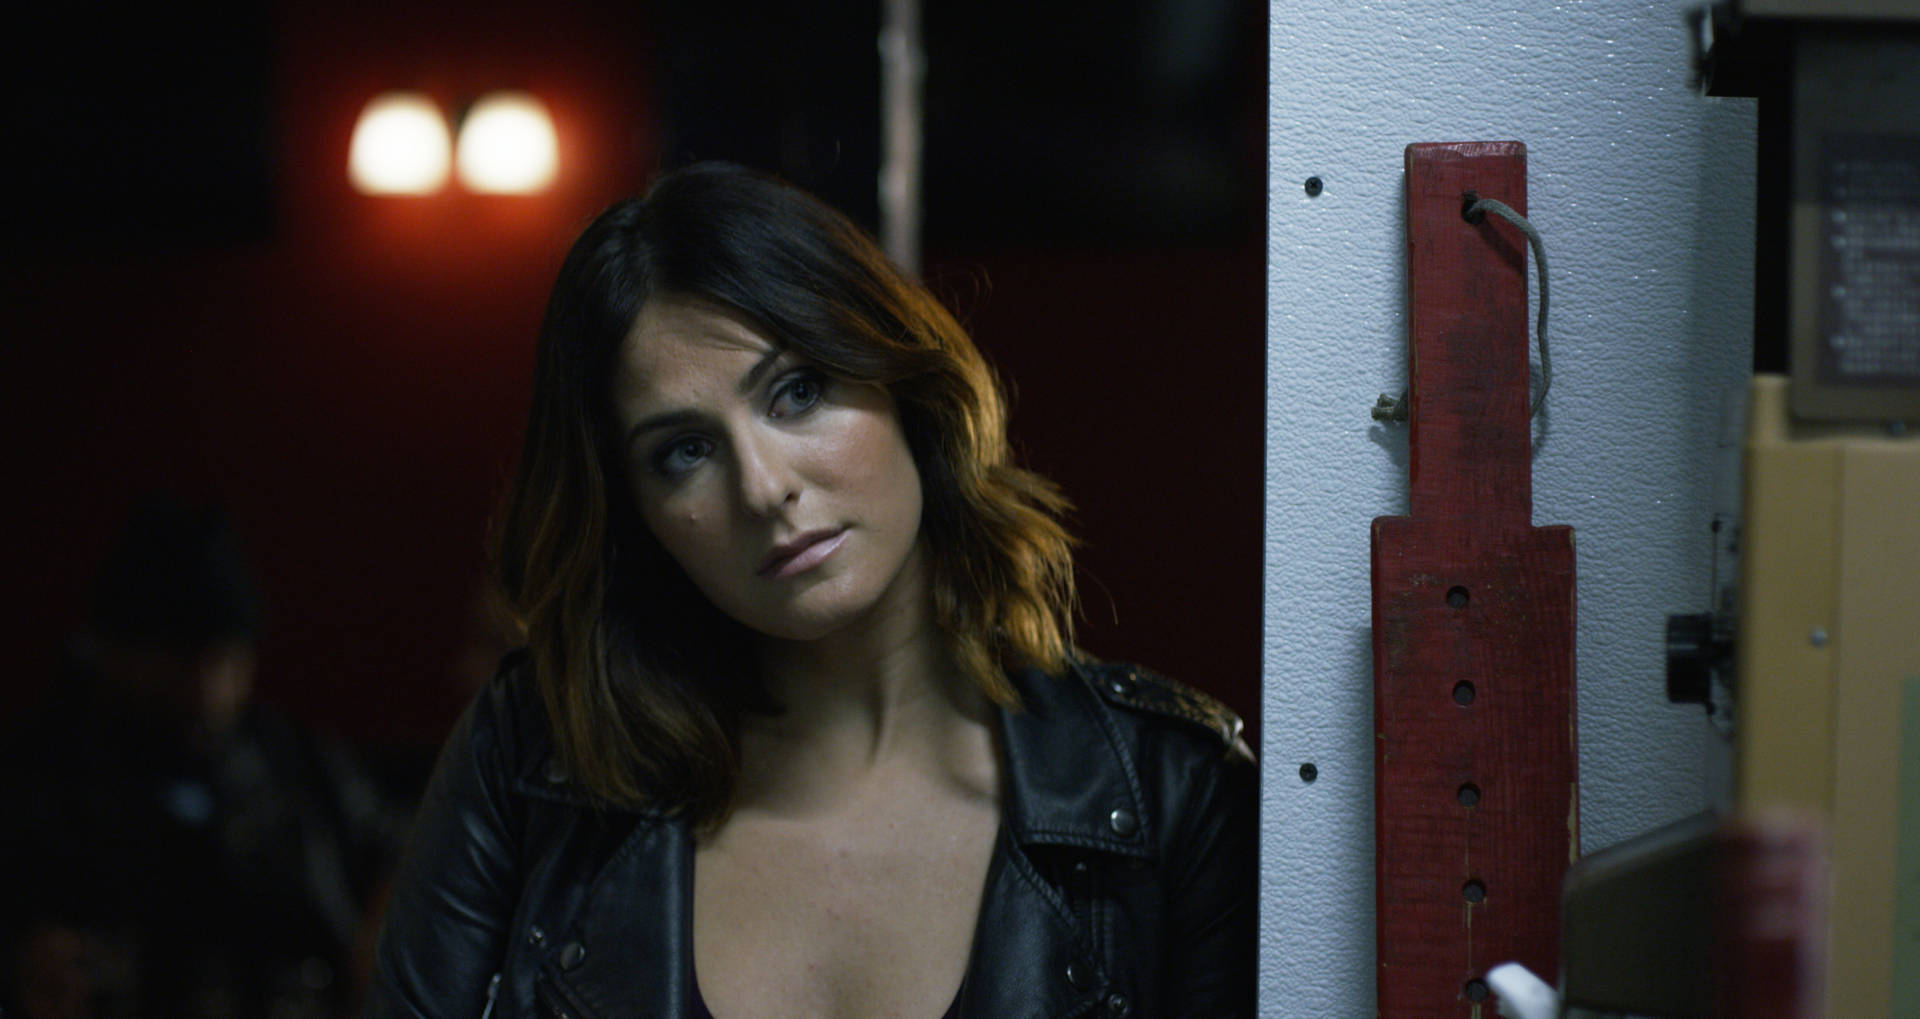 Scouttaylor-compton In 